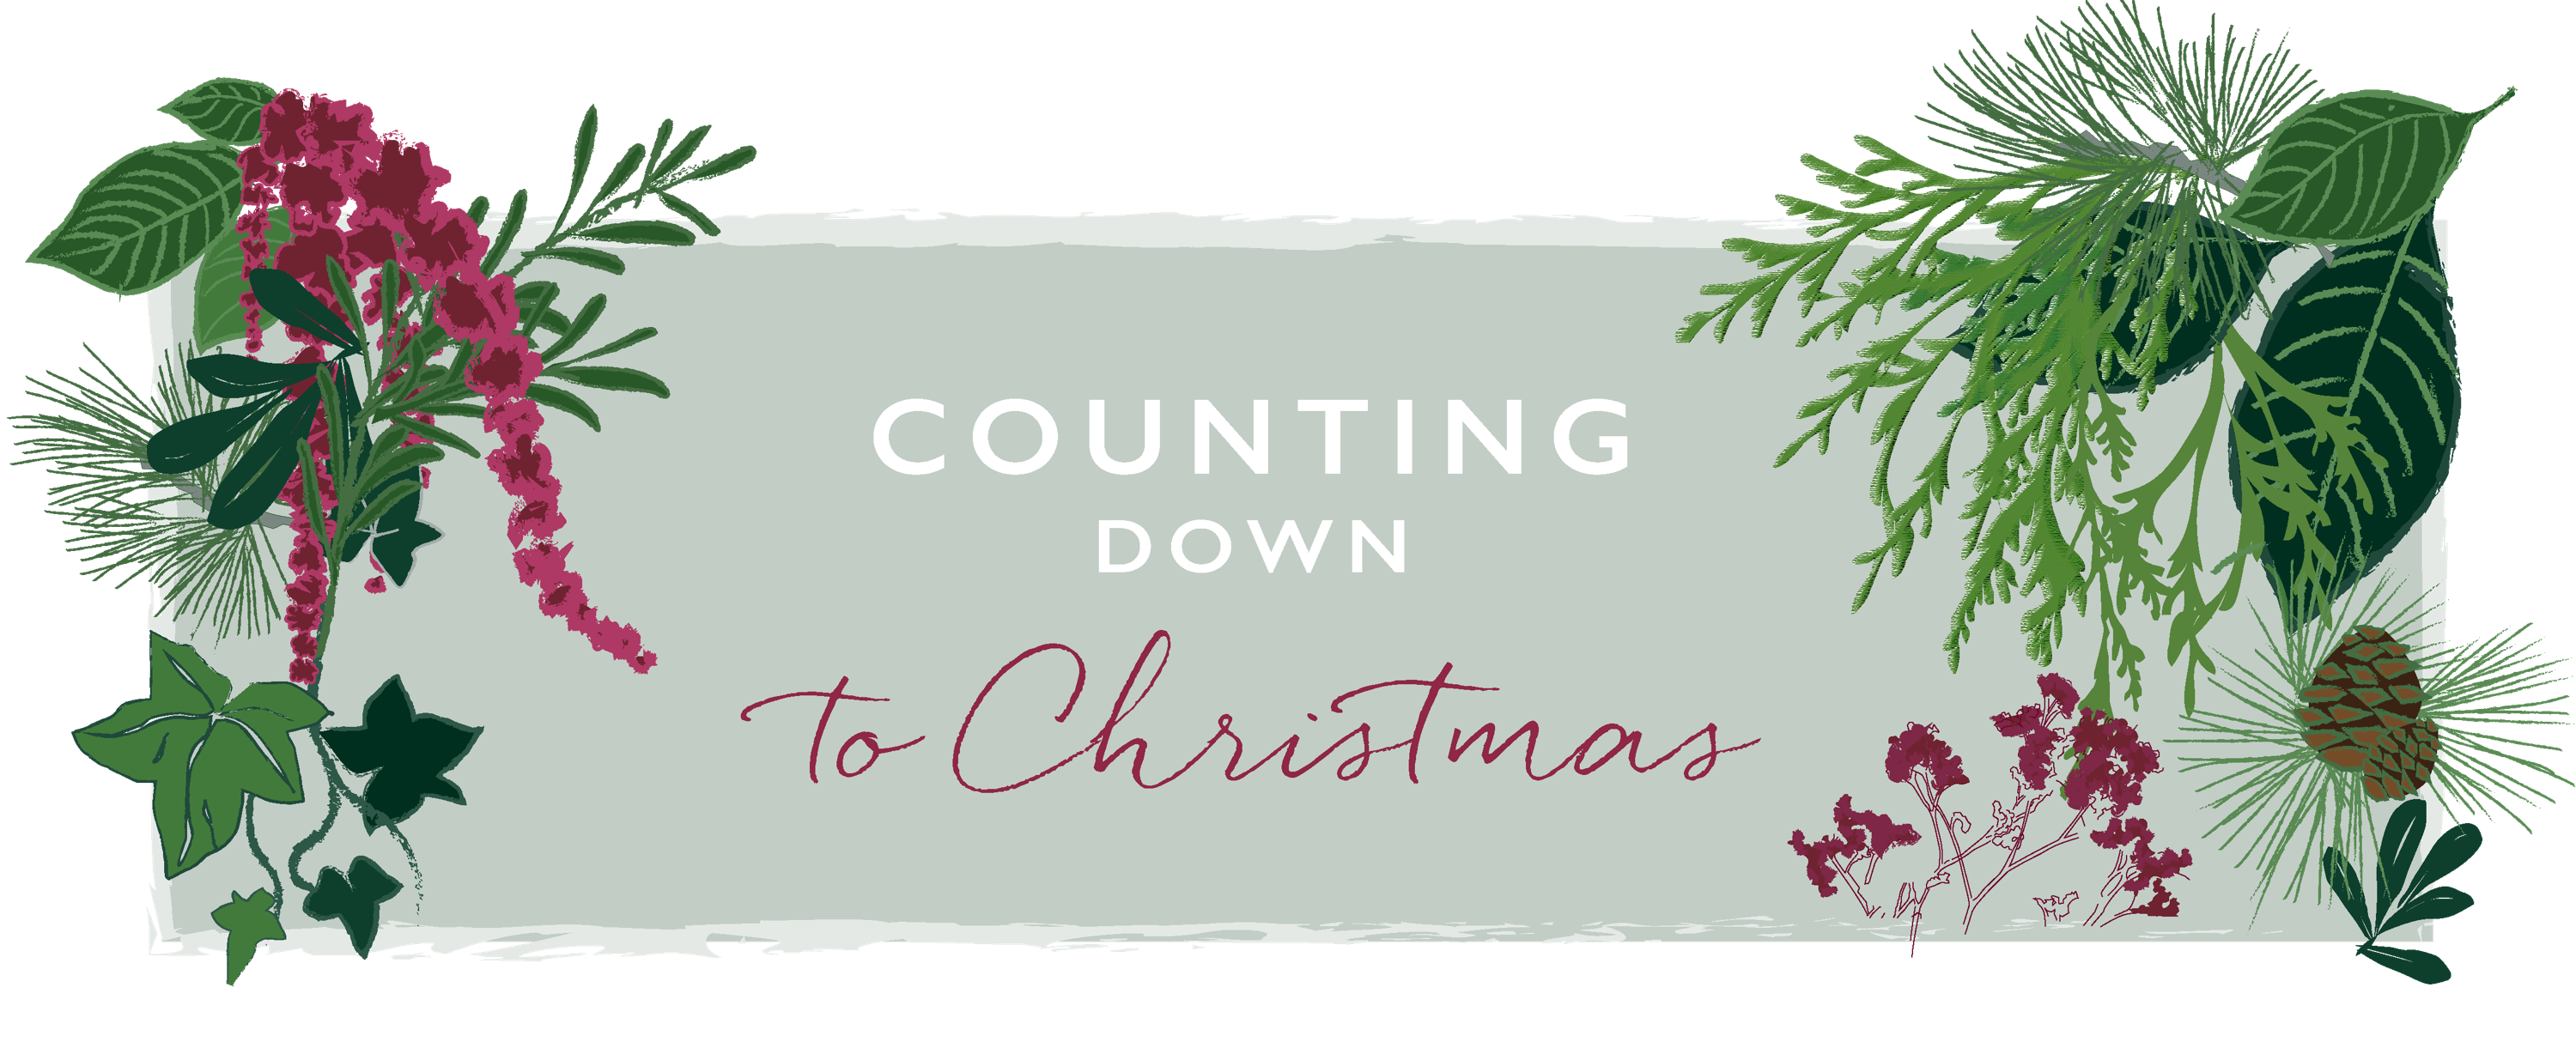 Counting down to Christmas